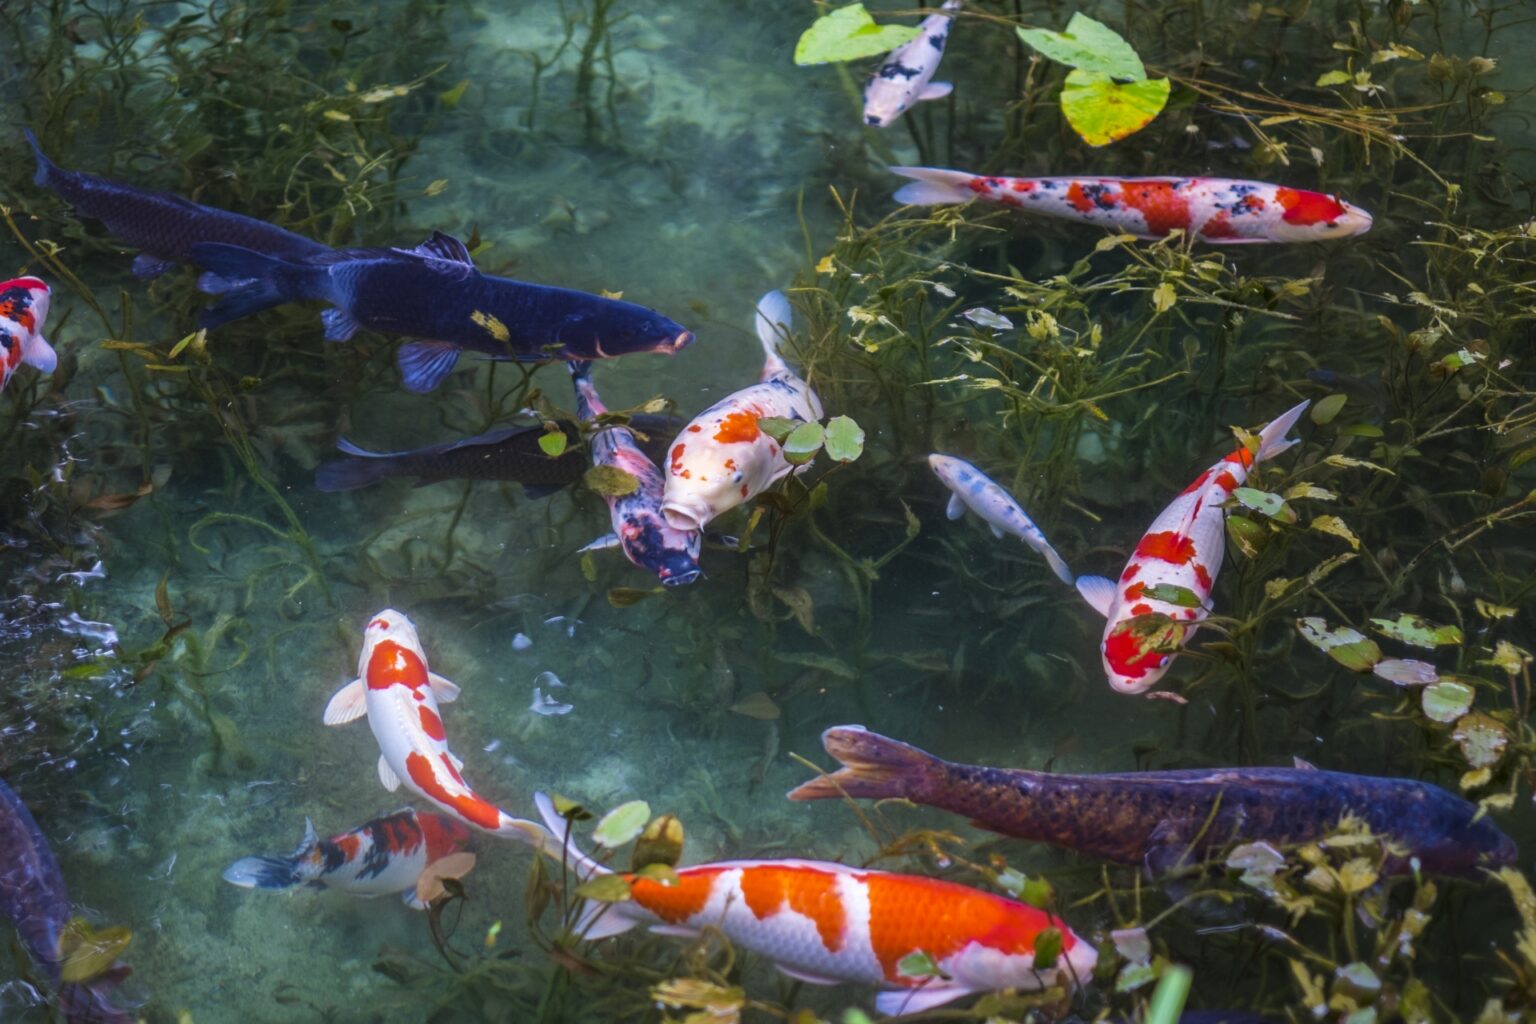 koi fish travel in groups of 4